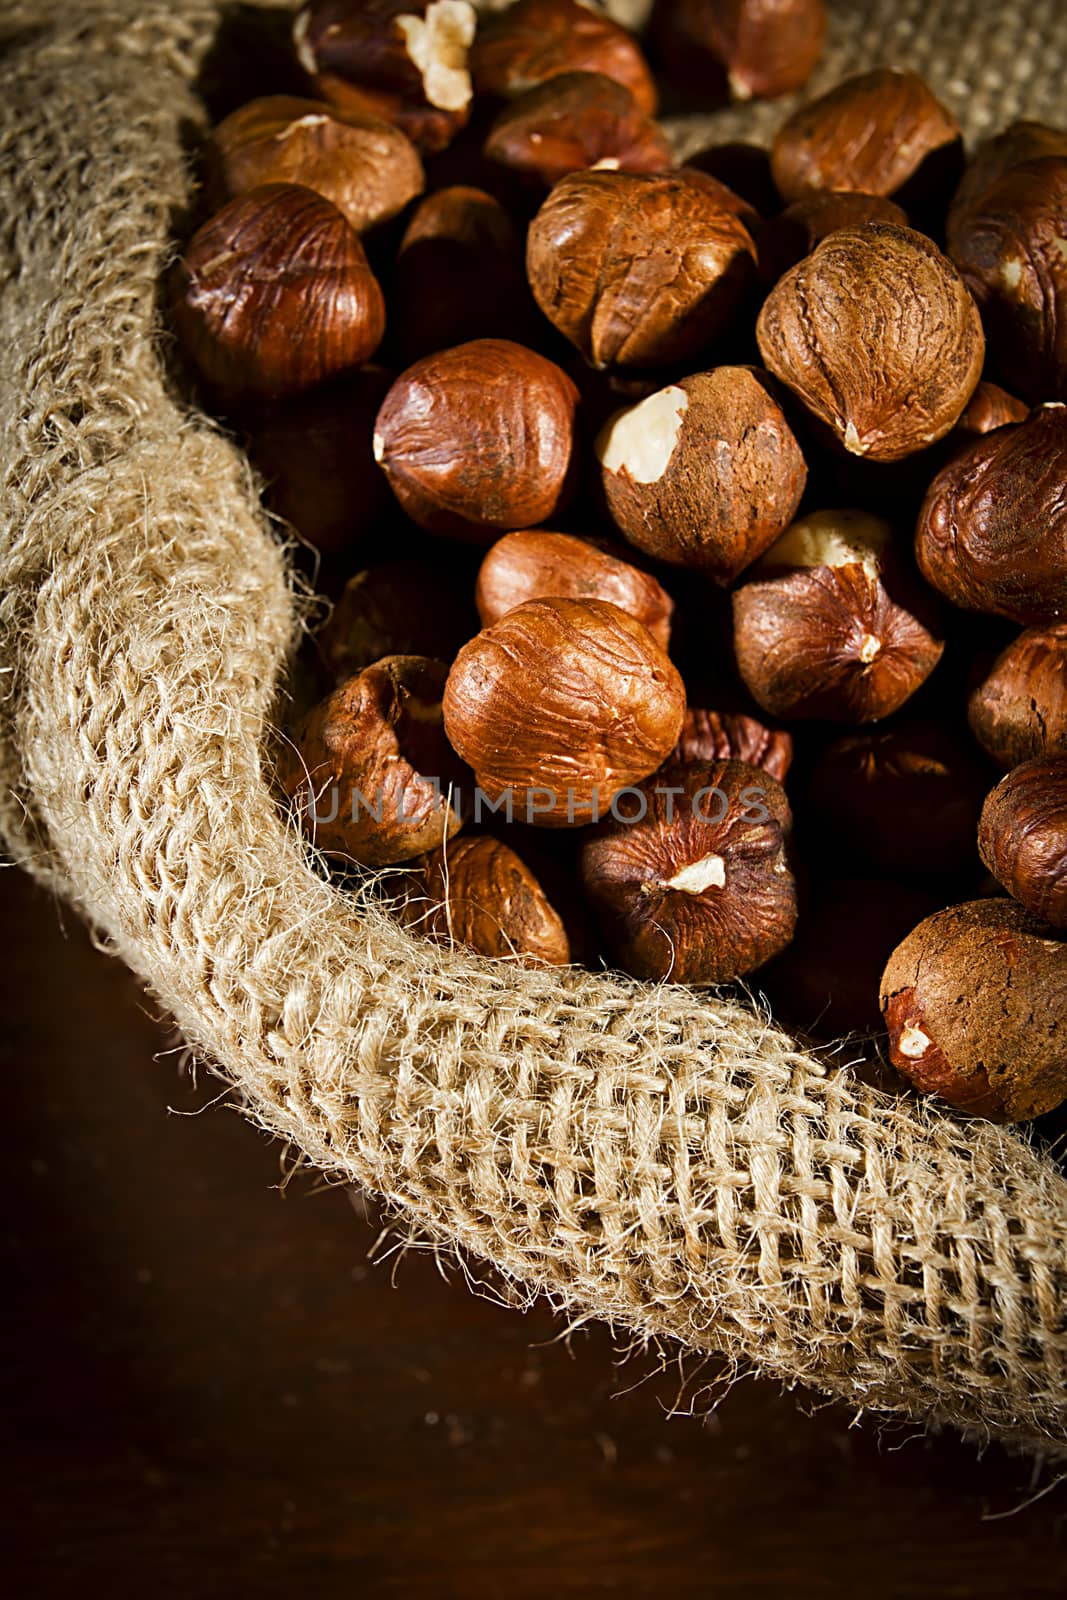 Unpeeled hazelnuts in a bag close up